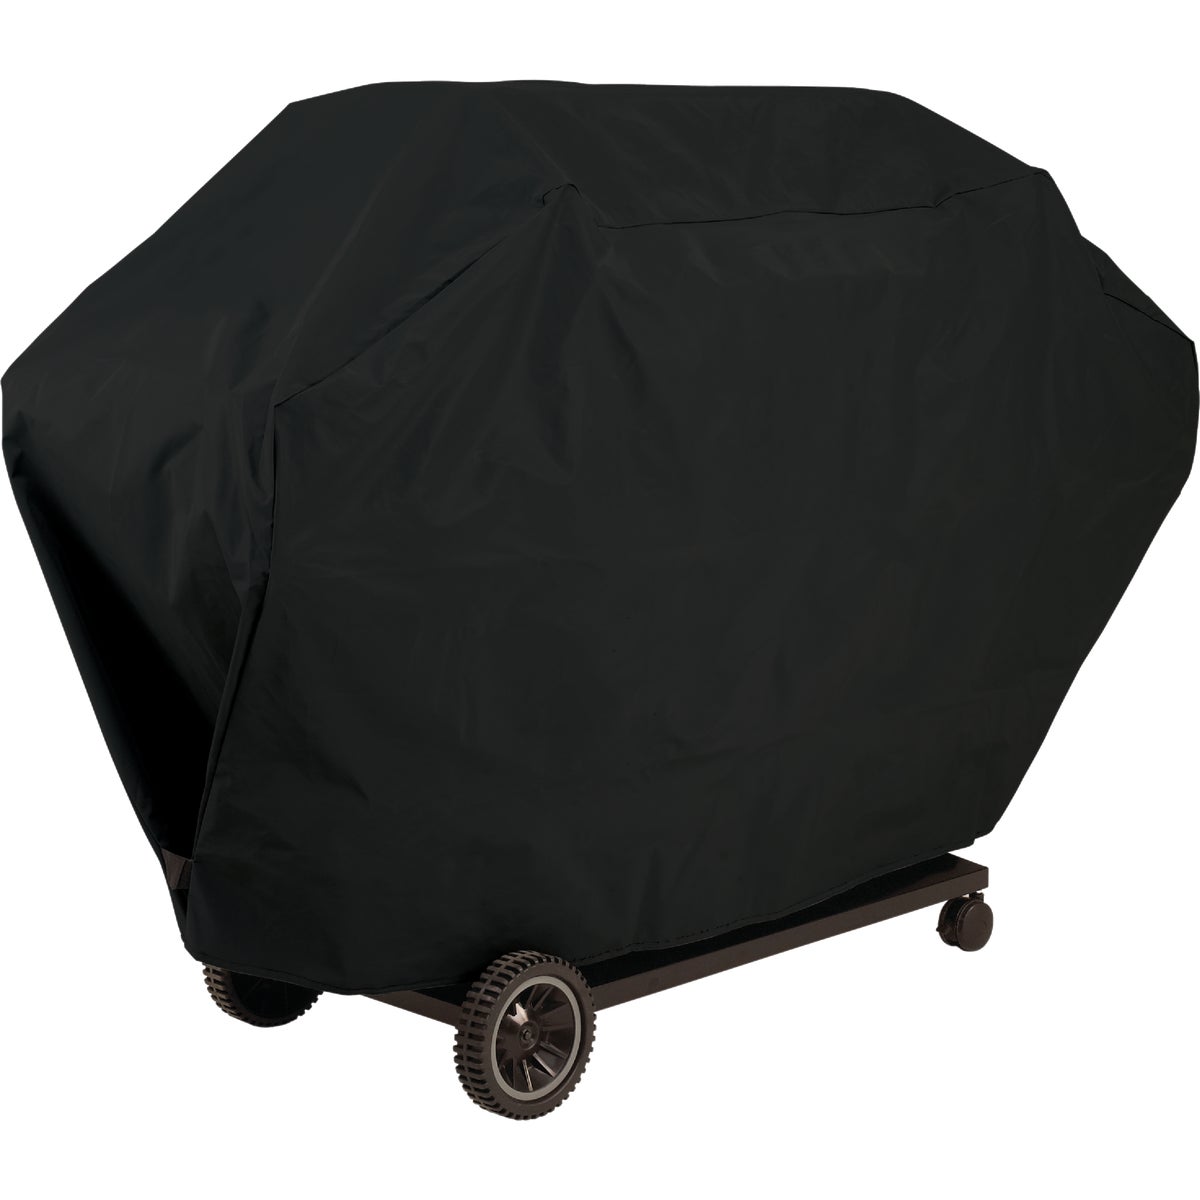 GrillPro 60 In. Black PVC Deluxe Grill Cover